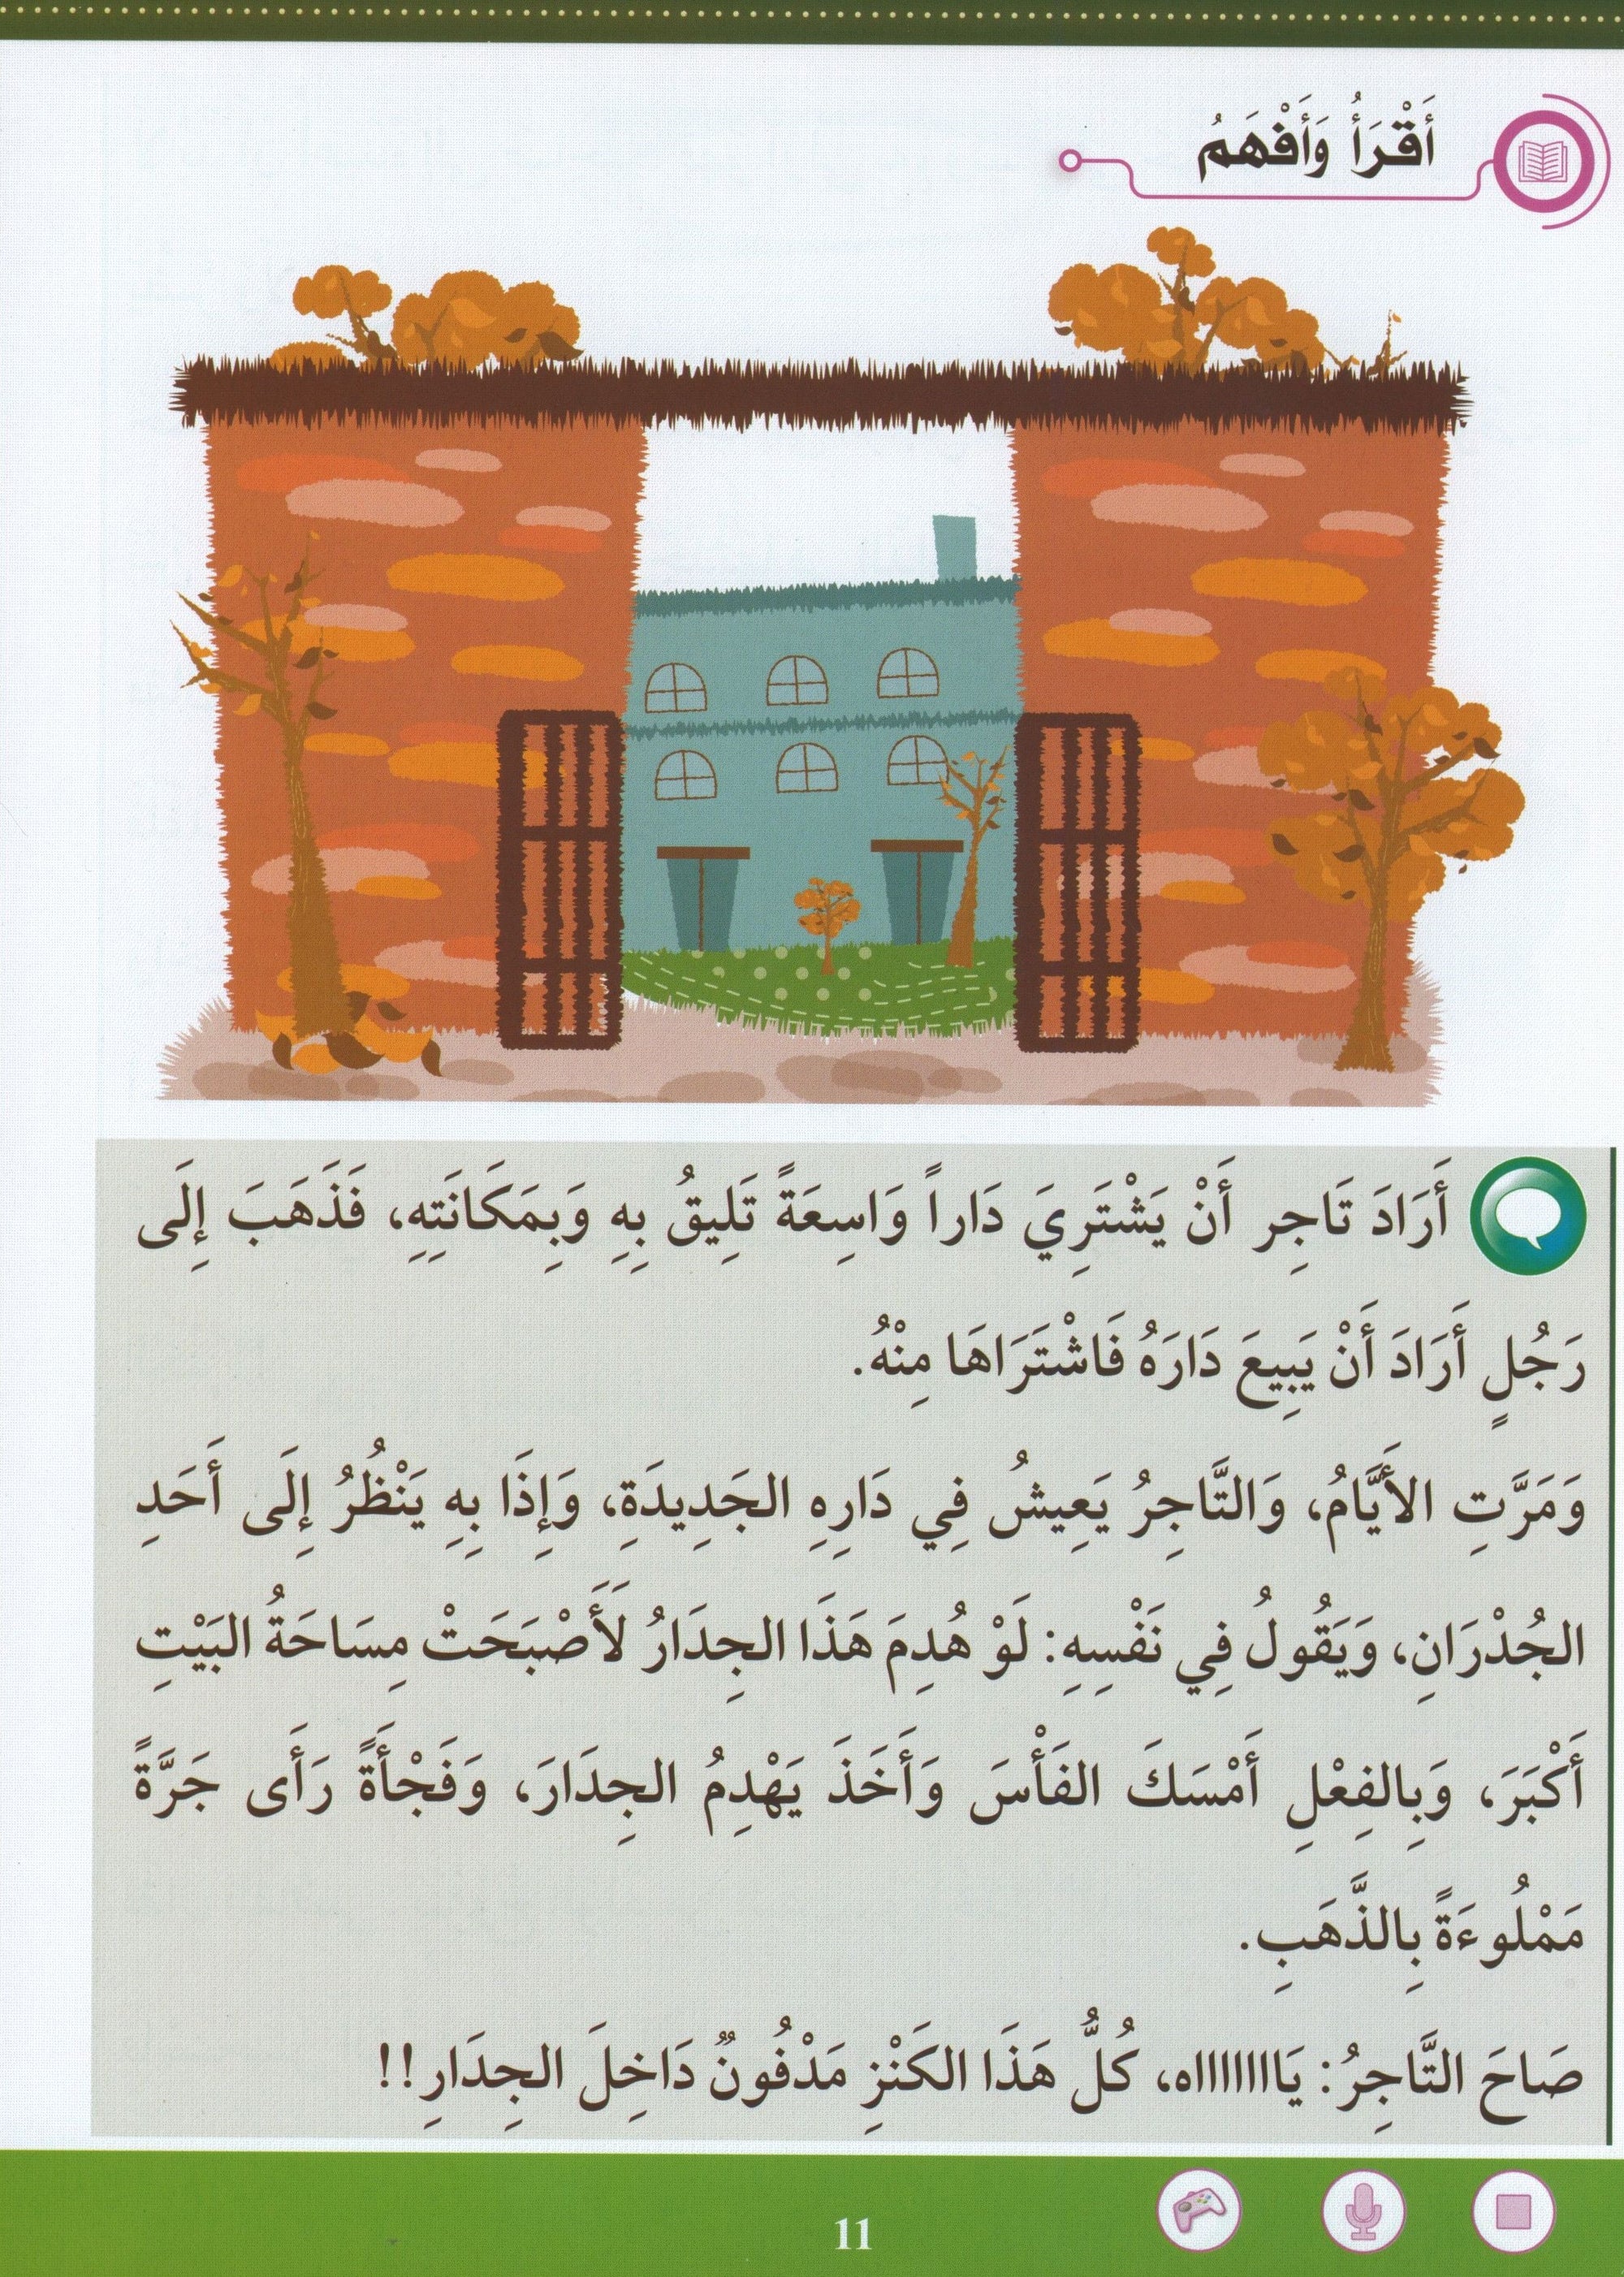 Learn How To Read And Write Level تعليم القراءة والكتابة 4